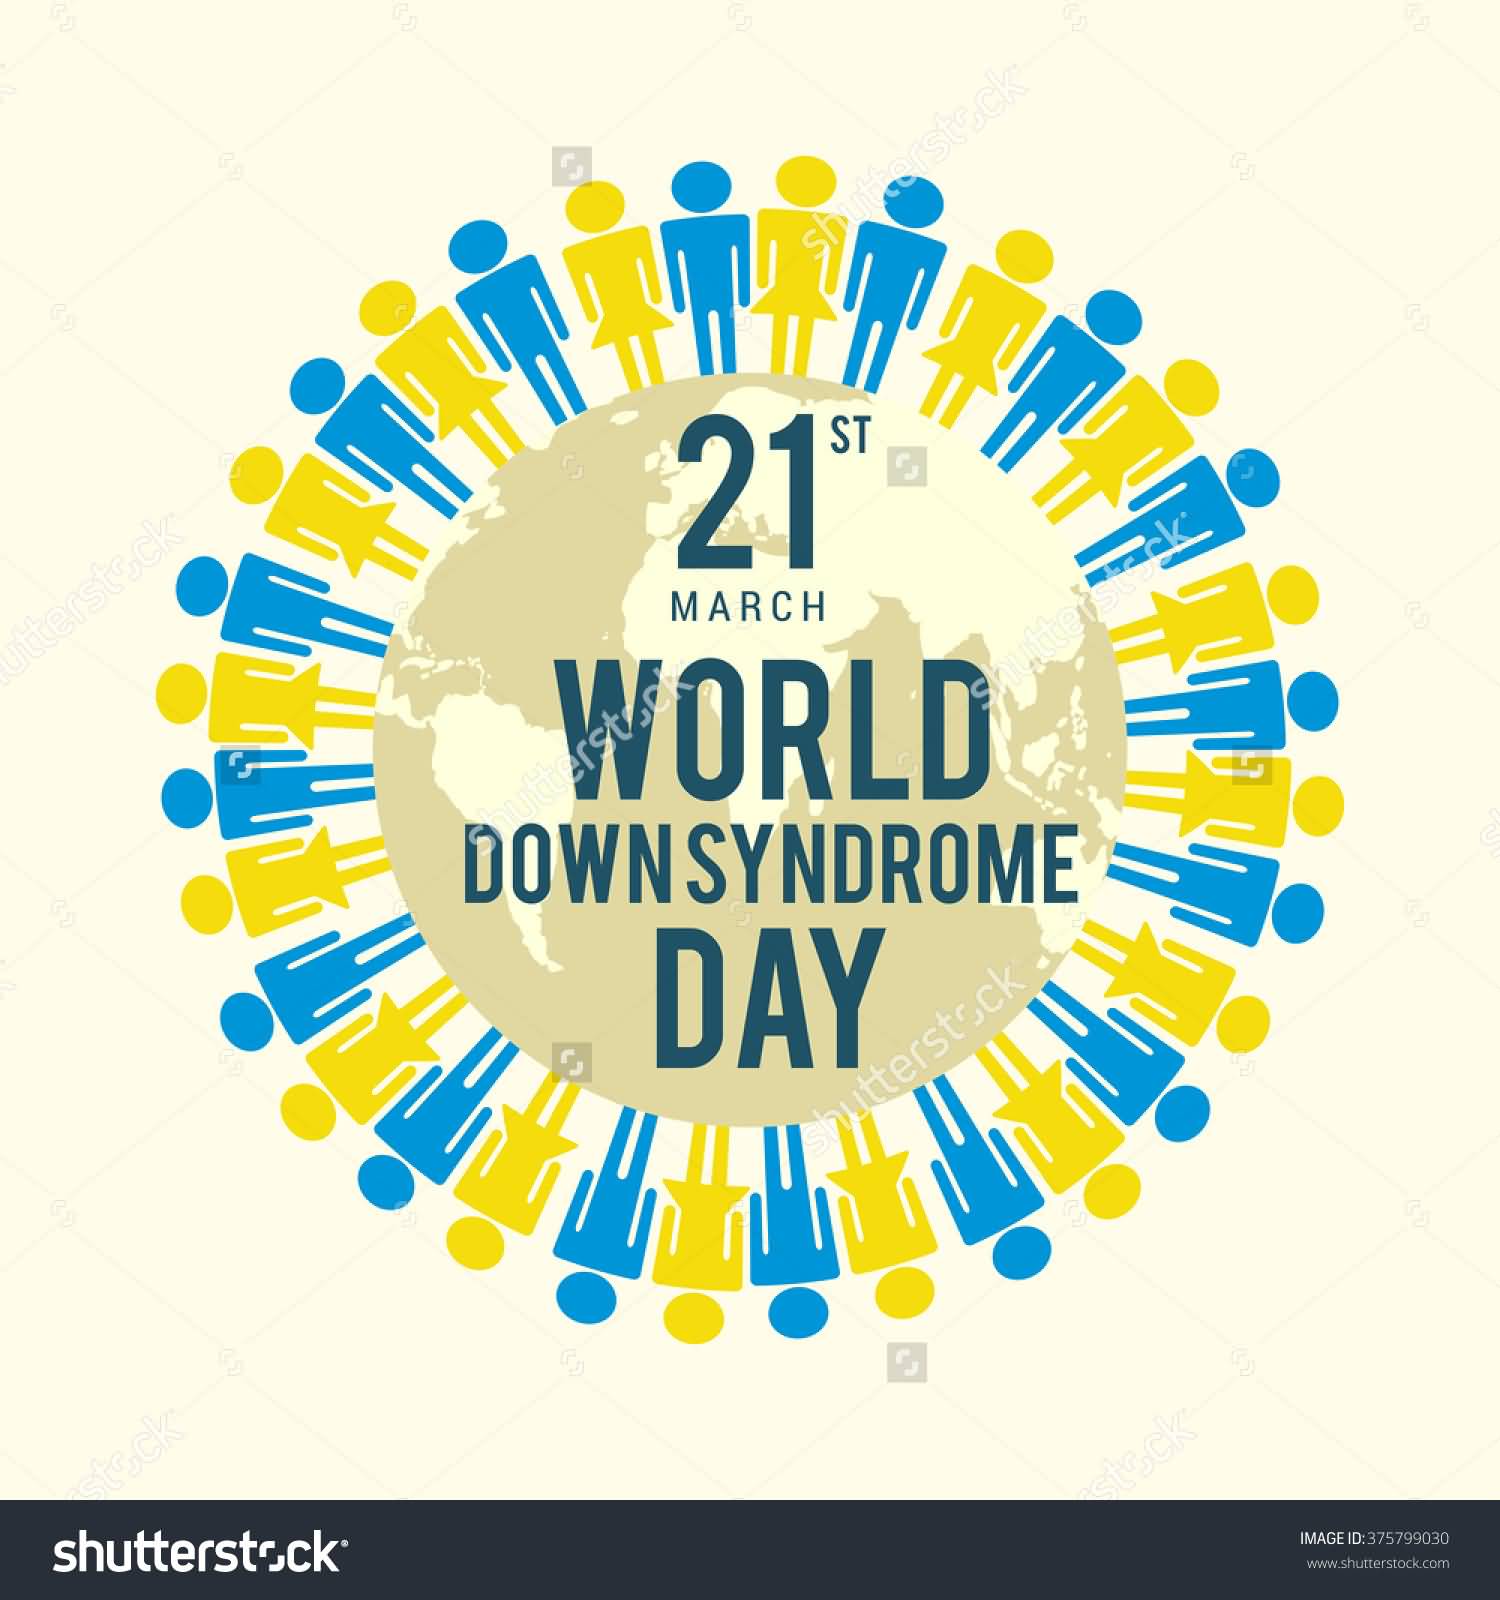 21st March World Down Syndrome Day Illustration